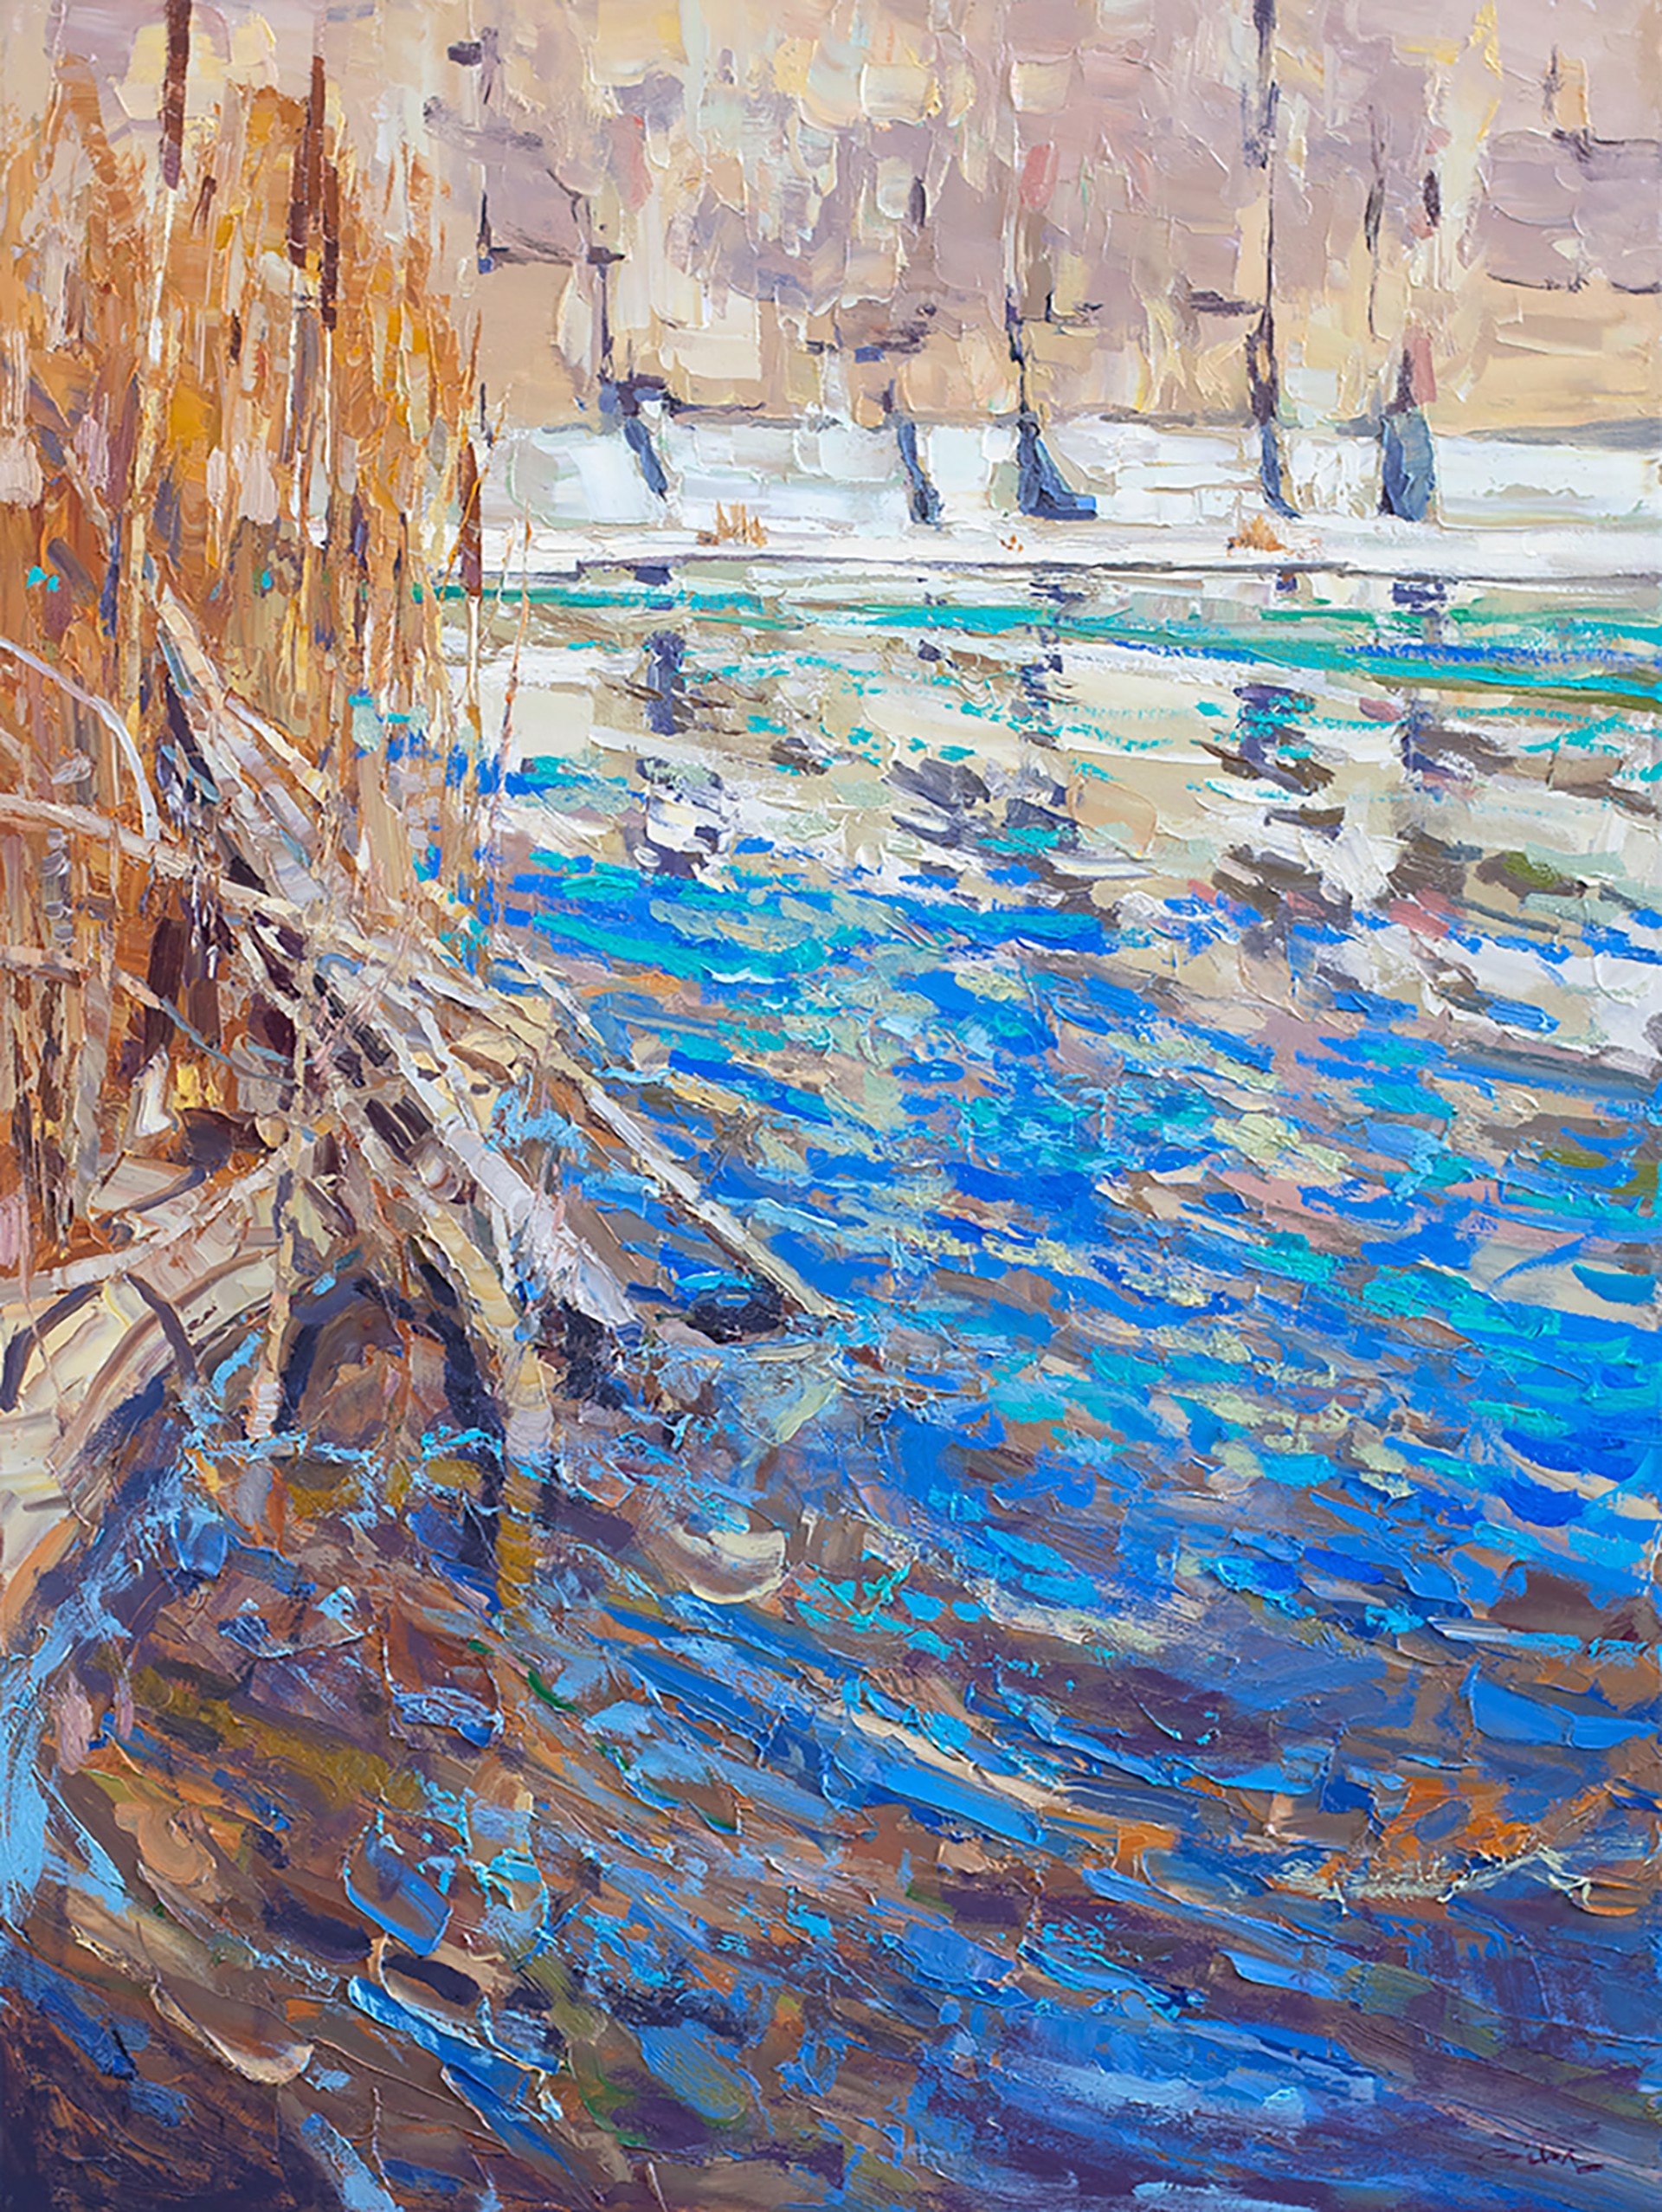 Original Oil Painting By Silas Thompson Of The Snake River With Blue Tones